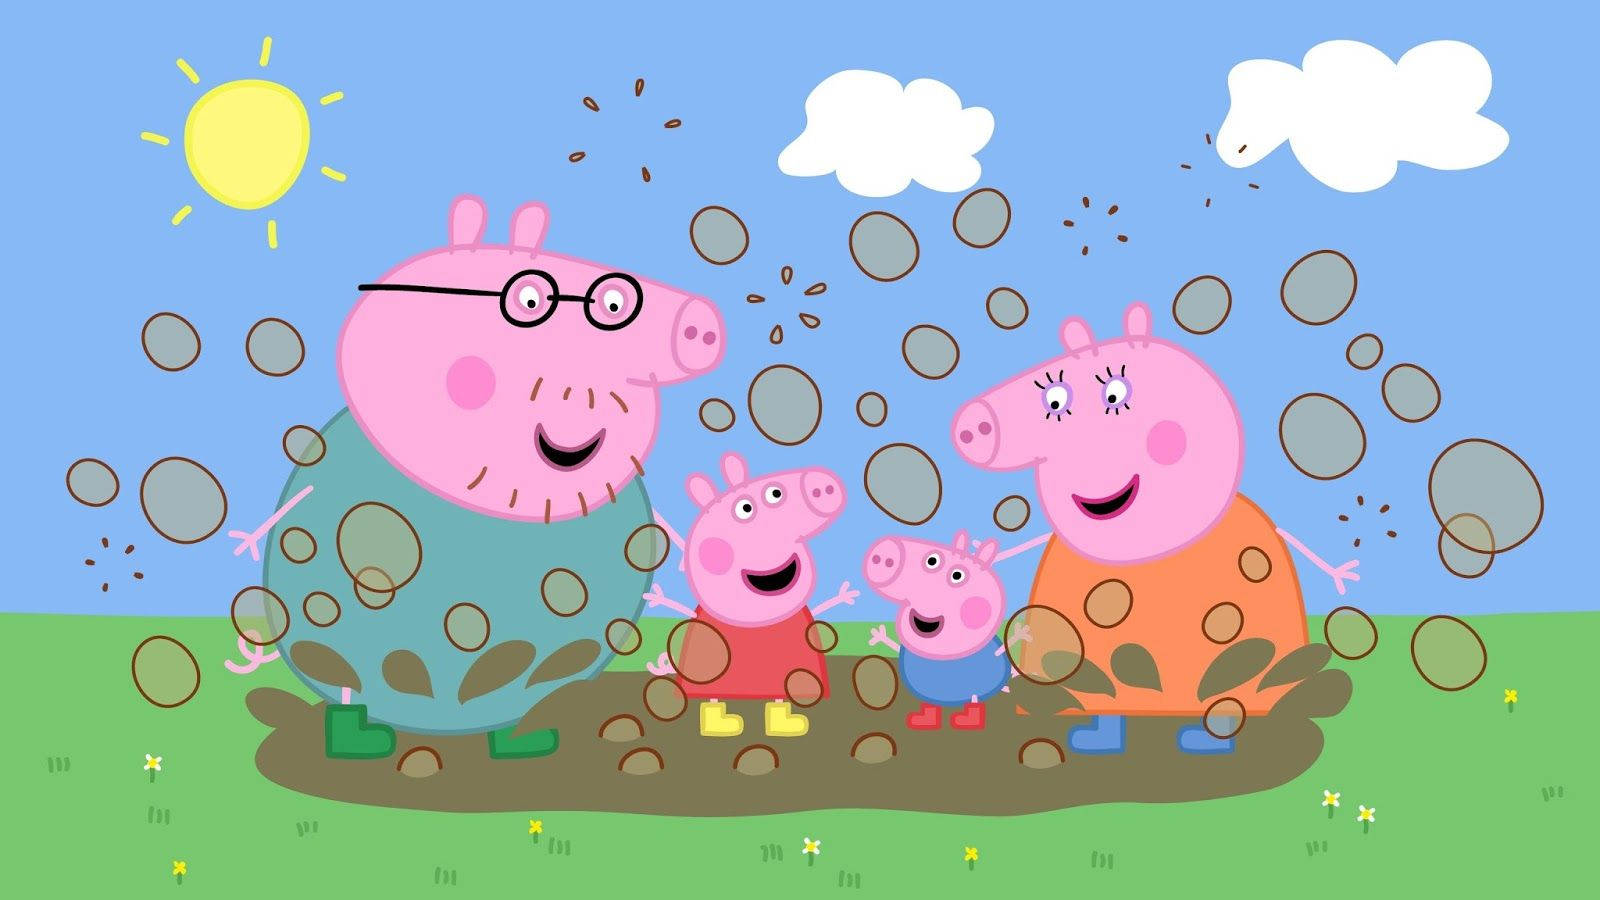 Peppa Pig and her family splash in muddy puddles. Wallpaper